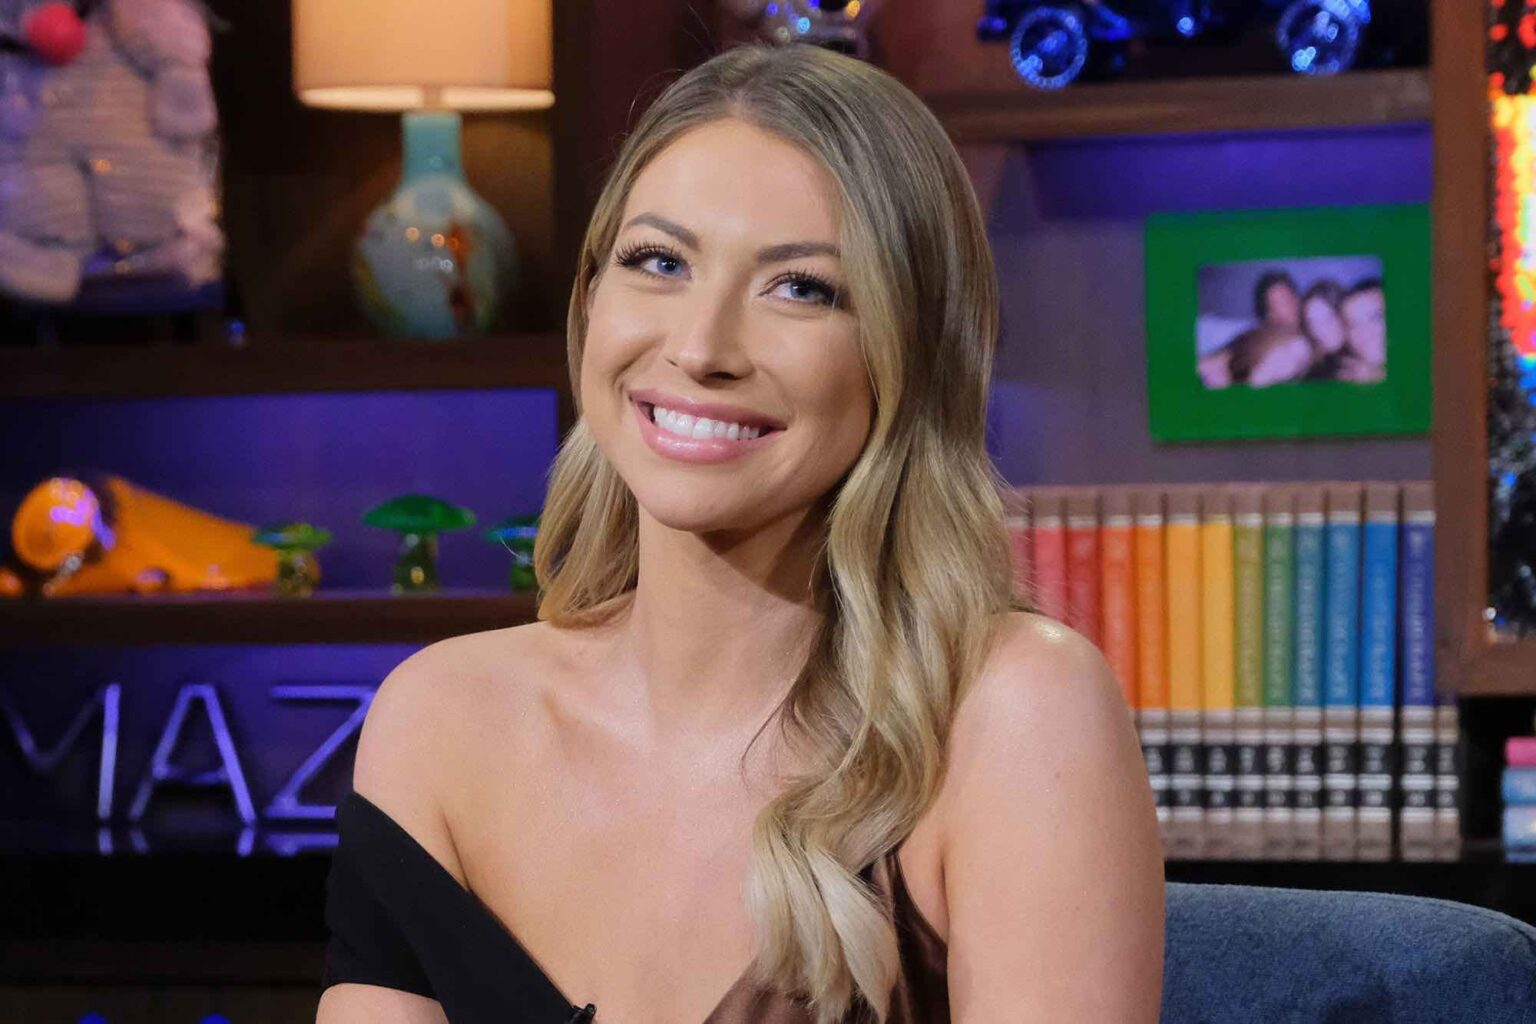 'Vanderpump Rules' star Stassi Schroeder caught the axe after racist actons on set. But as her net worth drops, more racist comments of hers are coming out.